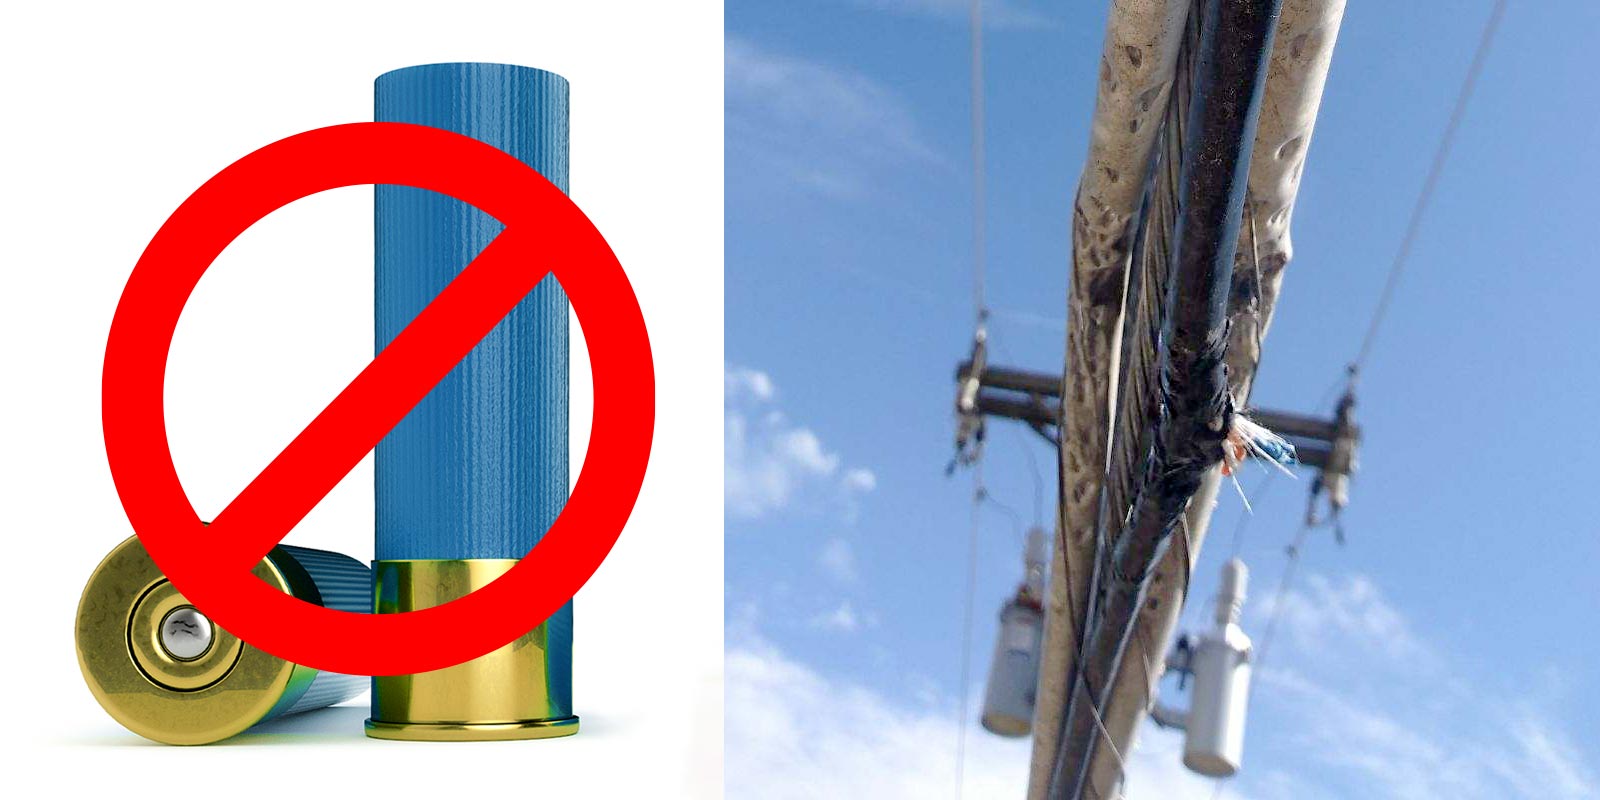 Damaged utility lines and shotgun shells with a "NO" symbol.